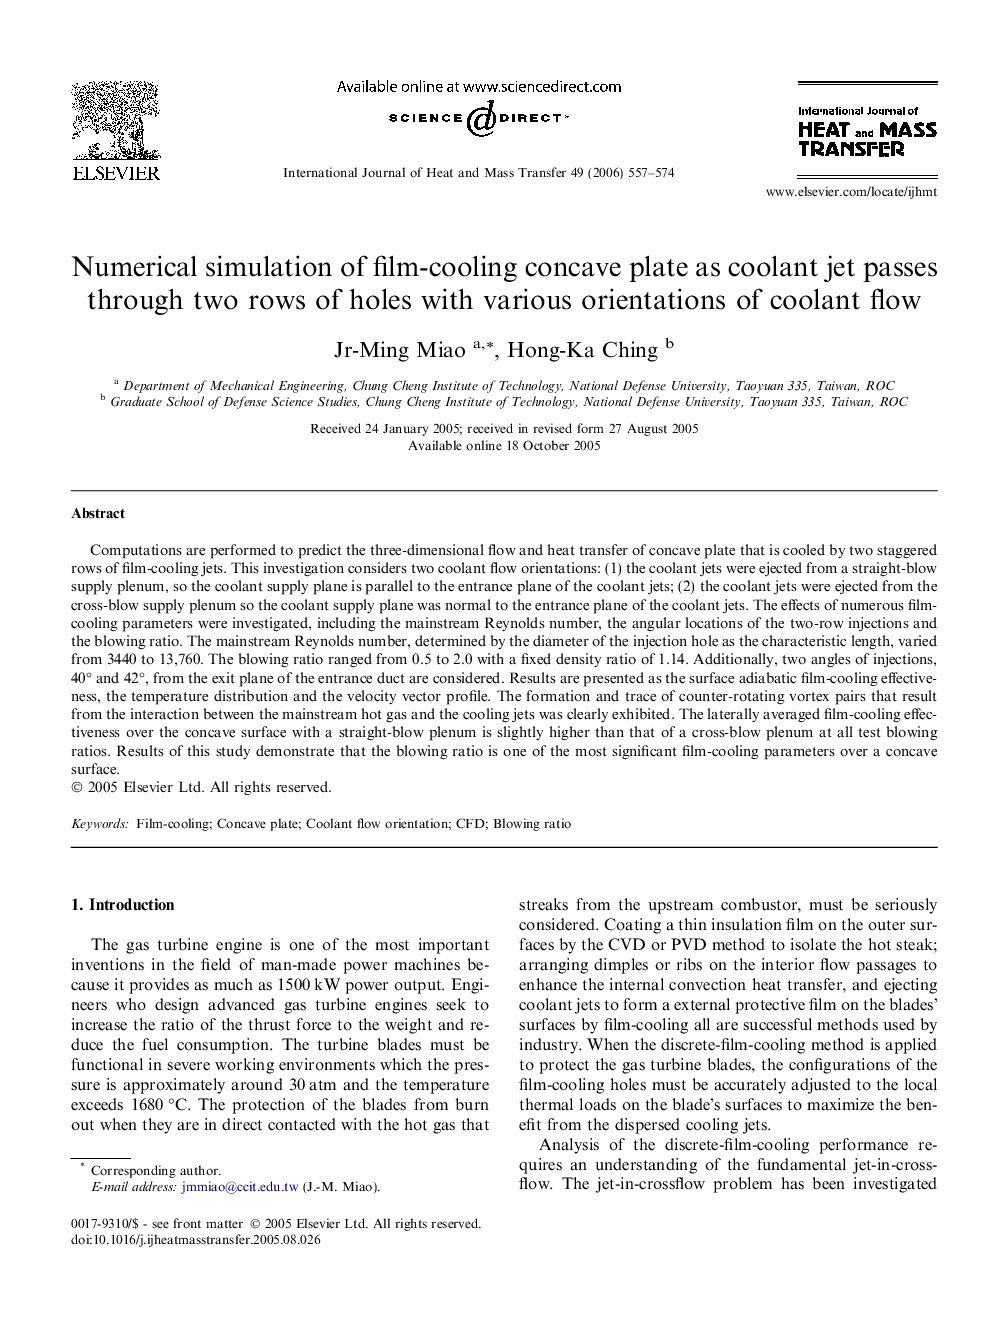 Numerical simulation of film-cooling concave plate as coolant jet passes through two rows of holes with various orientations of coolant flow